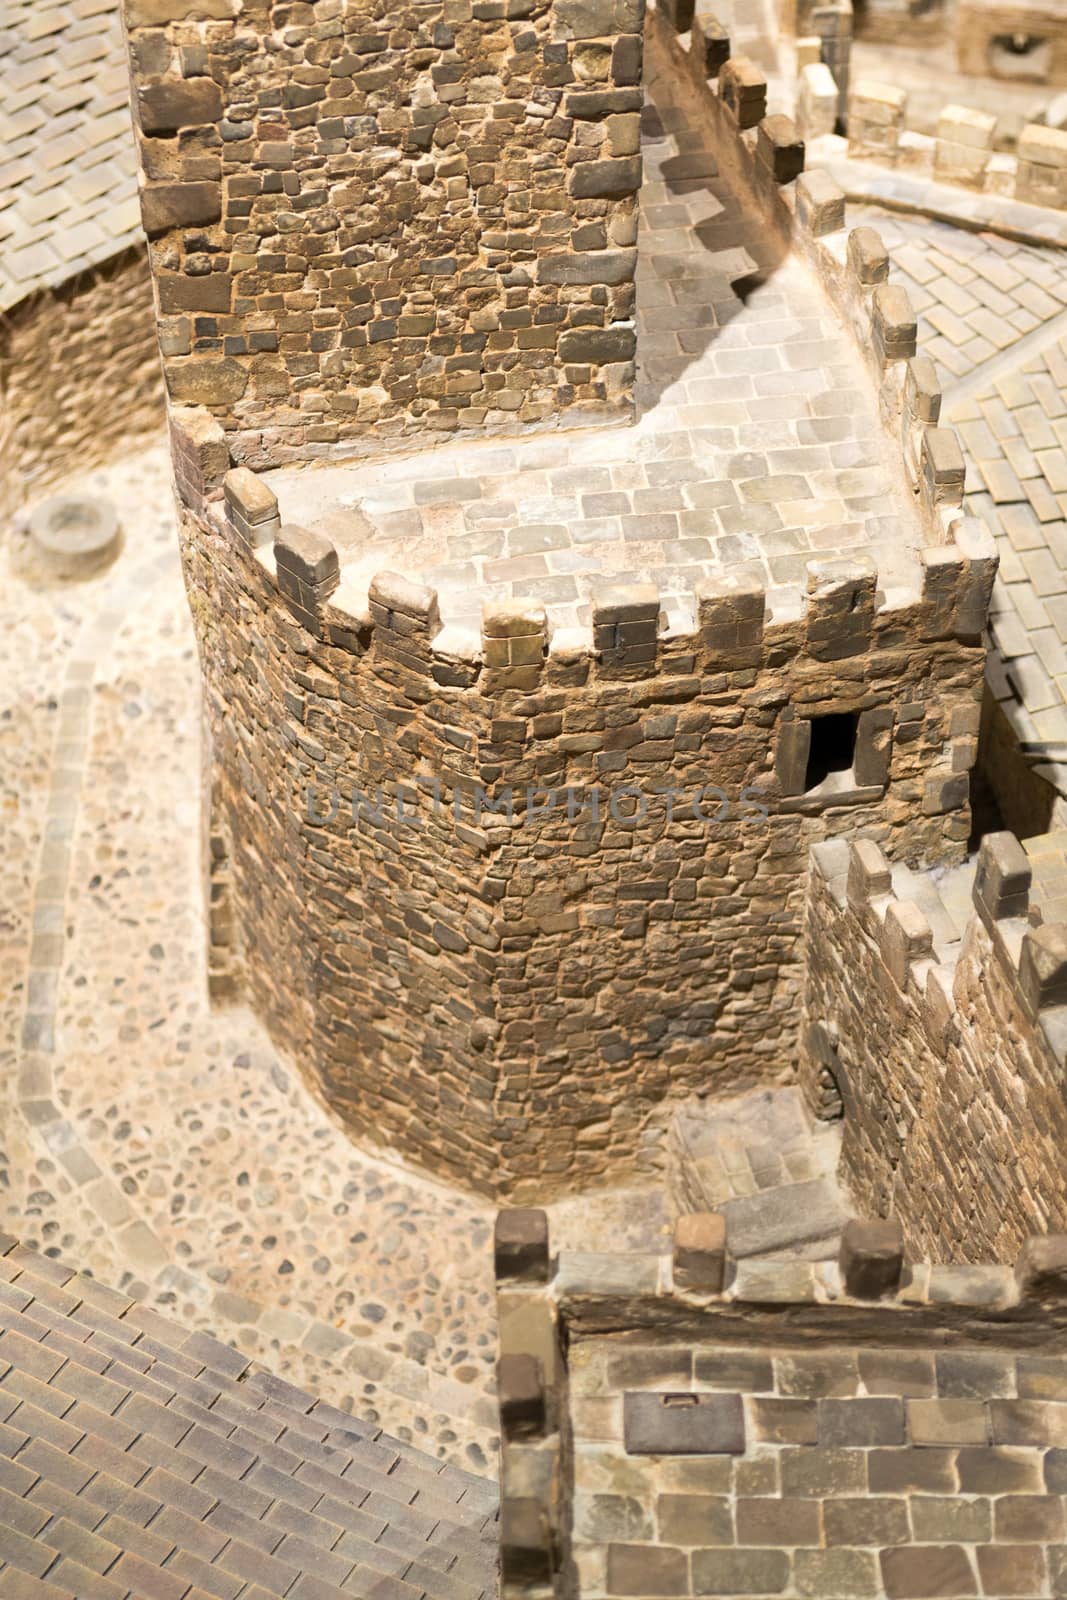 Located in a hill in the town of Javier (Spain) was built in the 10th century